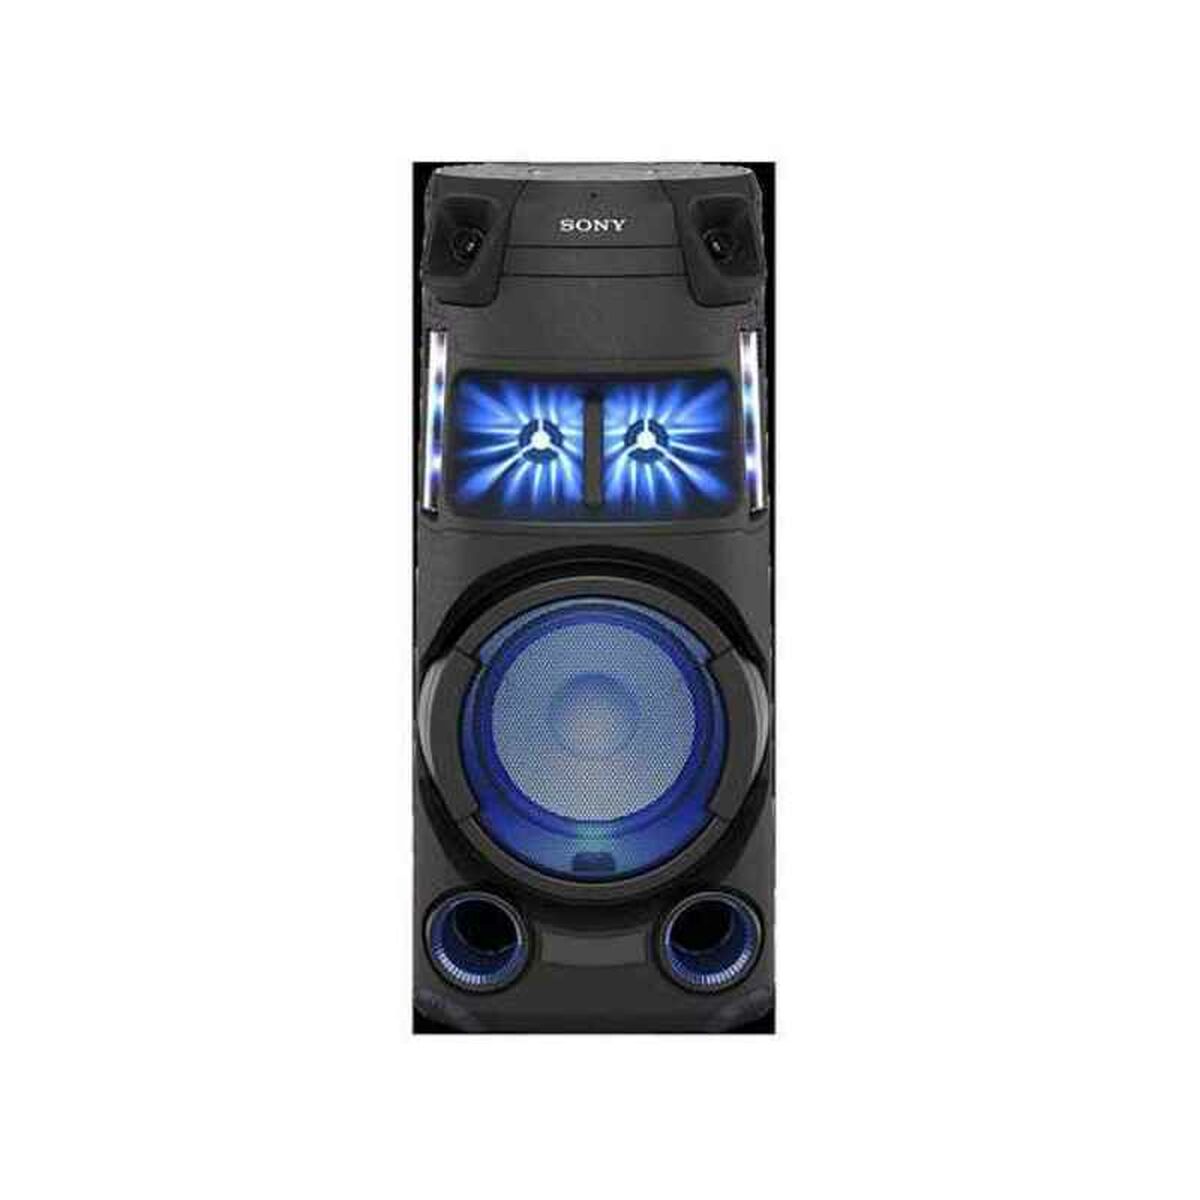 Speakers Sony MHCV43D Bluetooth Black, Sony, Electronics, Audio and Hi-Fi equipment, speakers-sony-mhcv43d-bluetooth-black, Brand_Sony, category-reference-2609, category-reference-2637, category-reference-2882, category-reference-t-19653, category-reference-t-7441, category-reference-t-7442, cinema and television, Condition_NEW, entertainment, music, Price_400 - 500, Teleworking, RiotNook